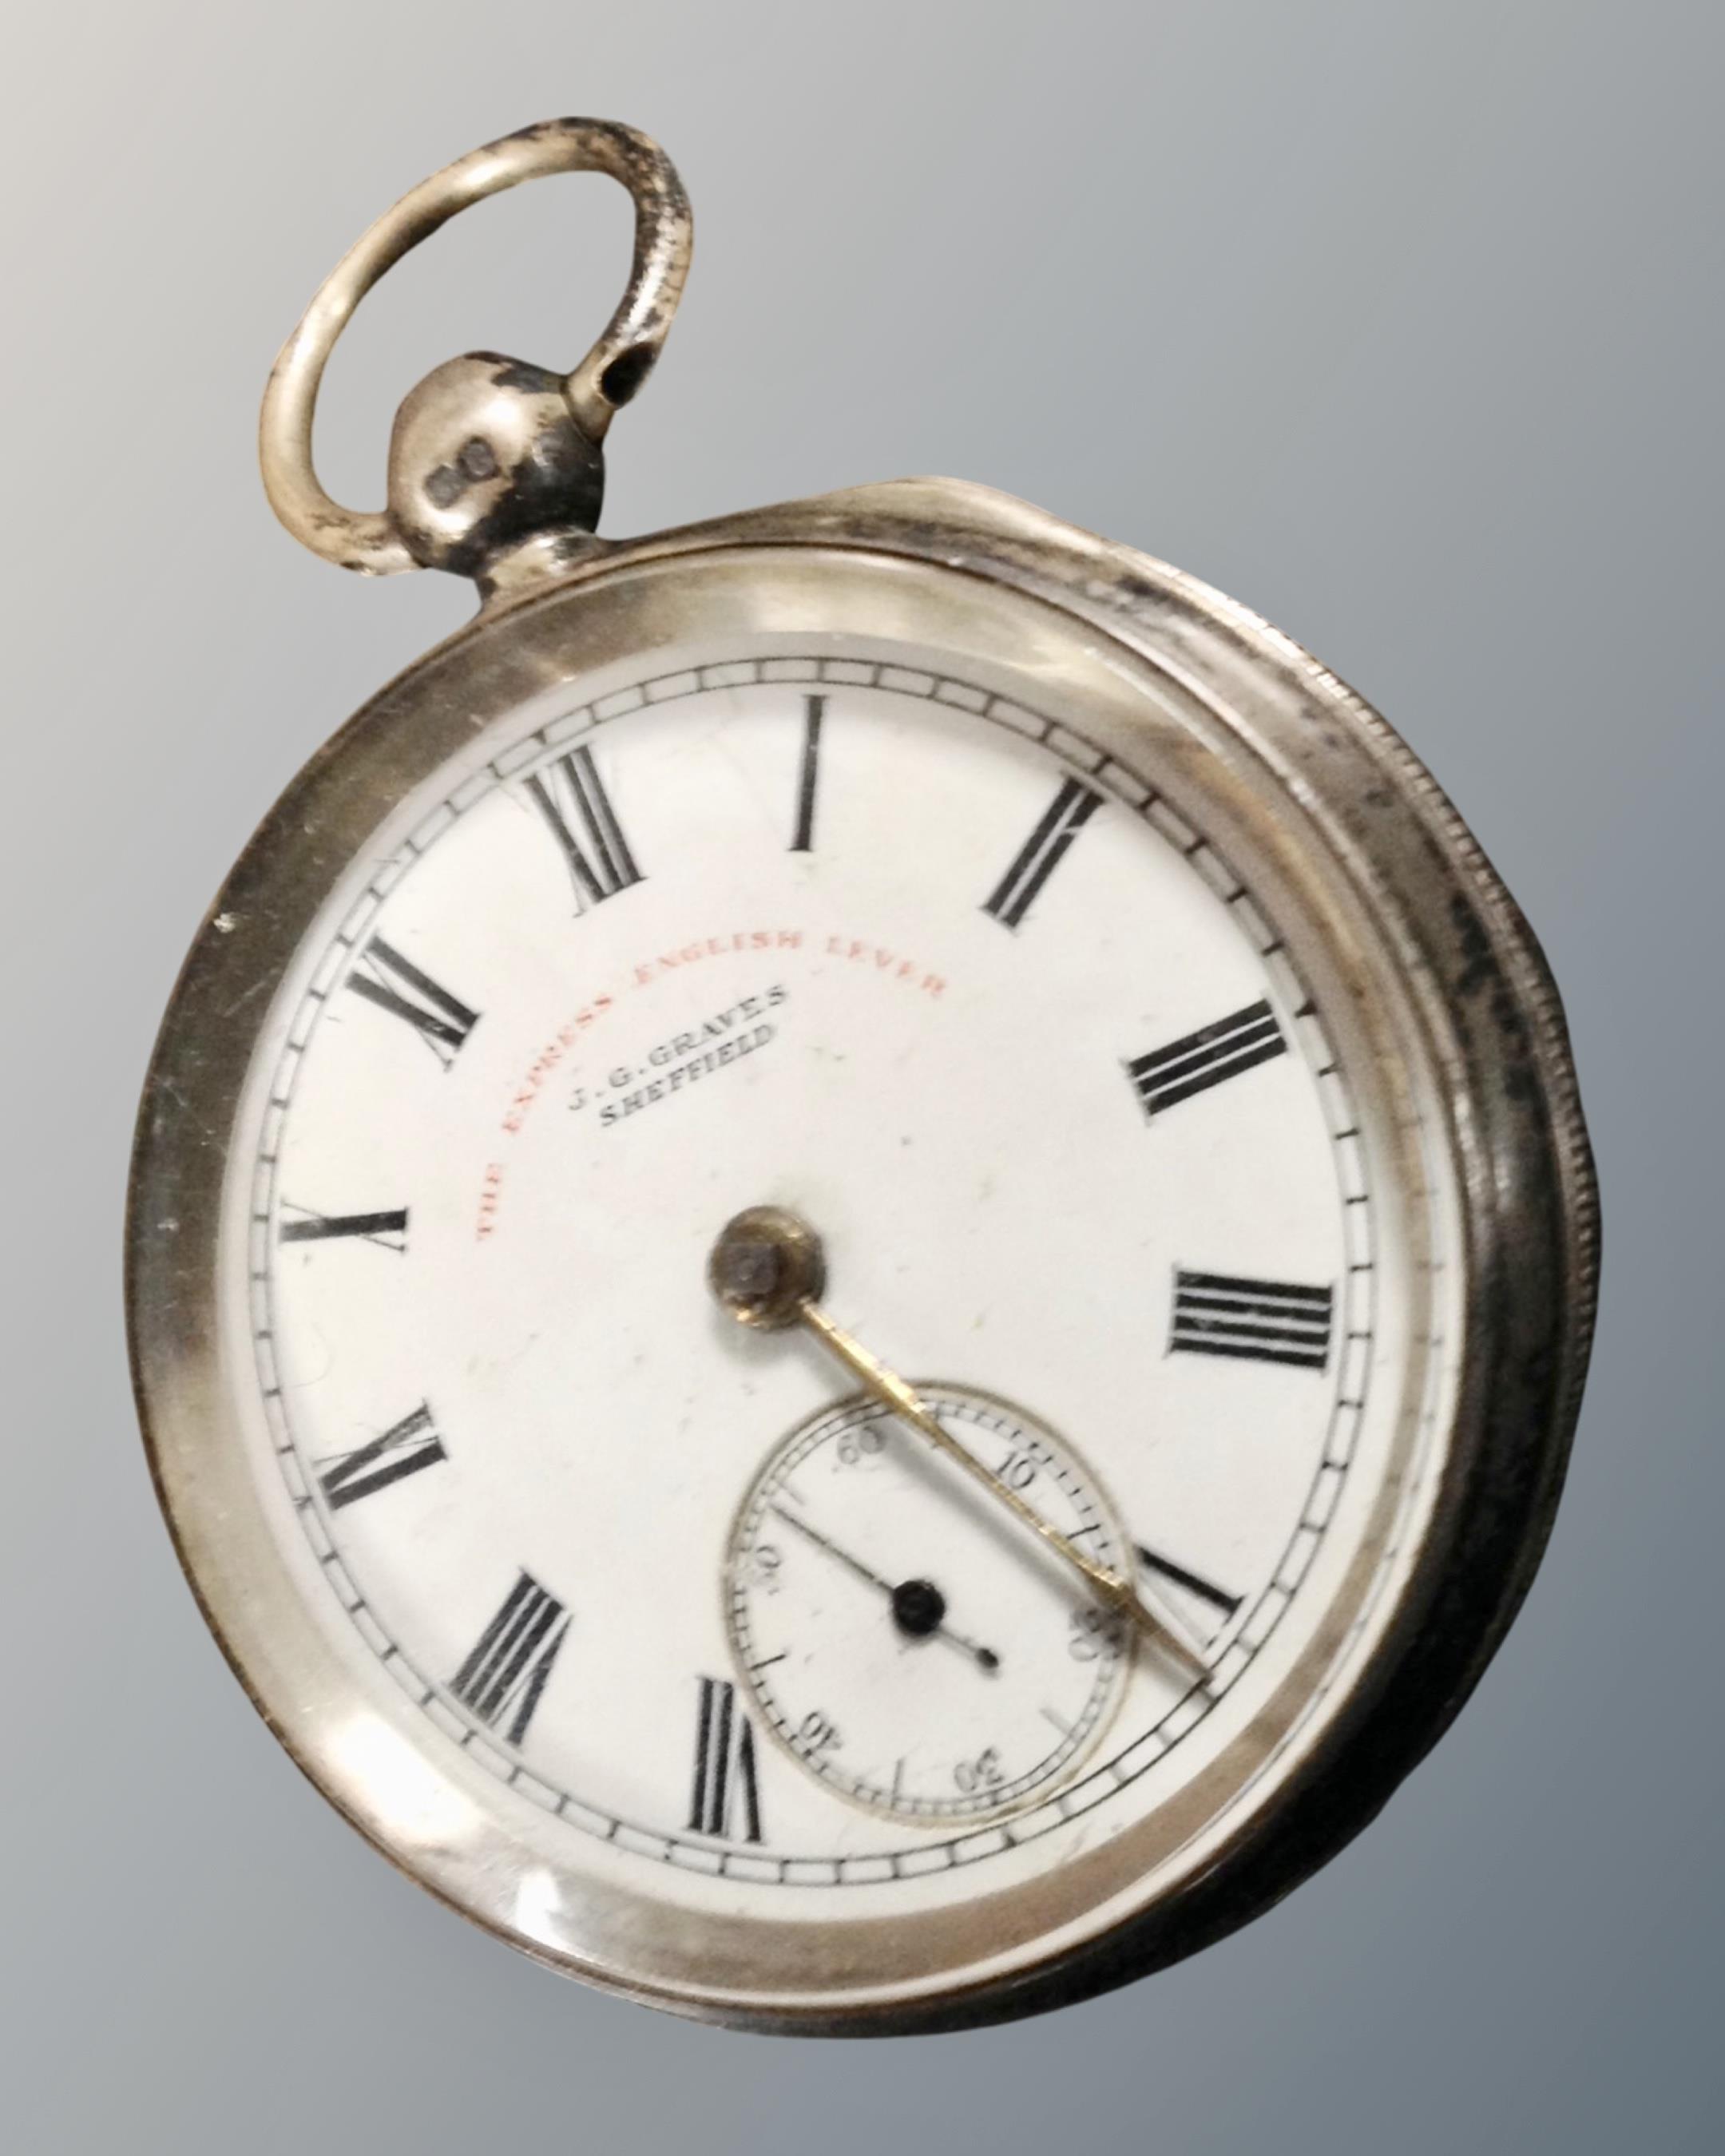 A silver cased Express English lever pocket watch